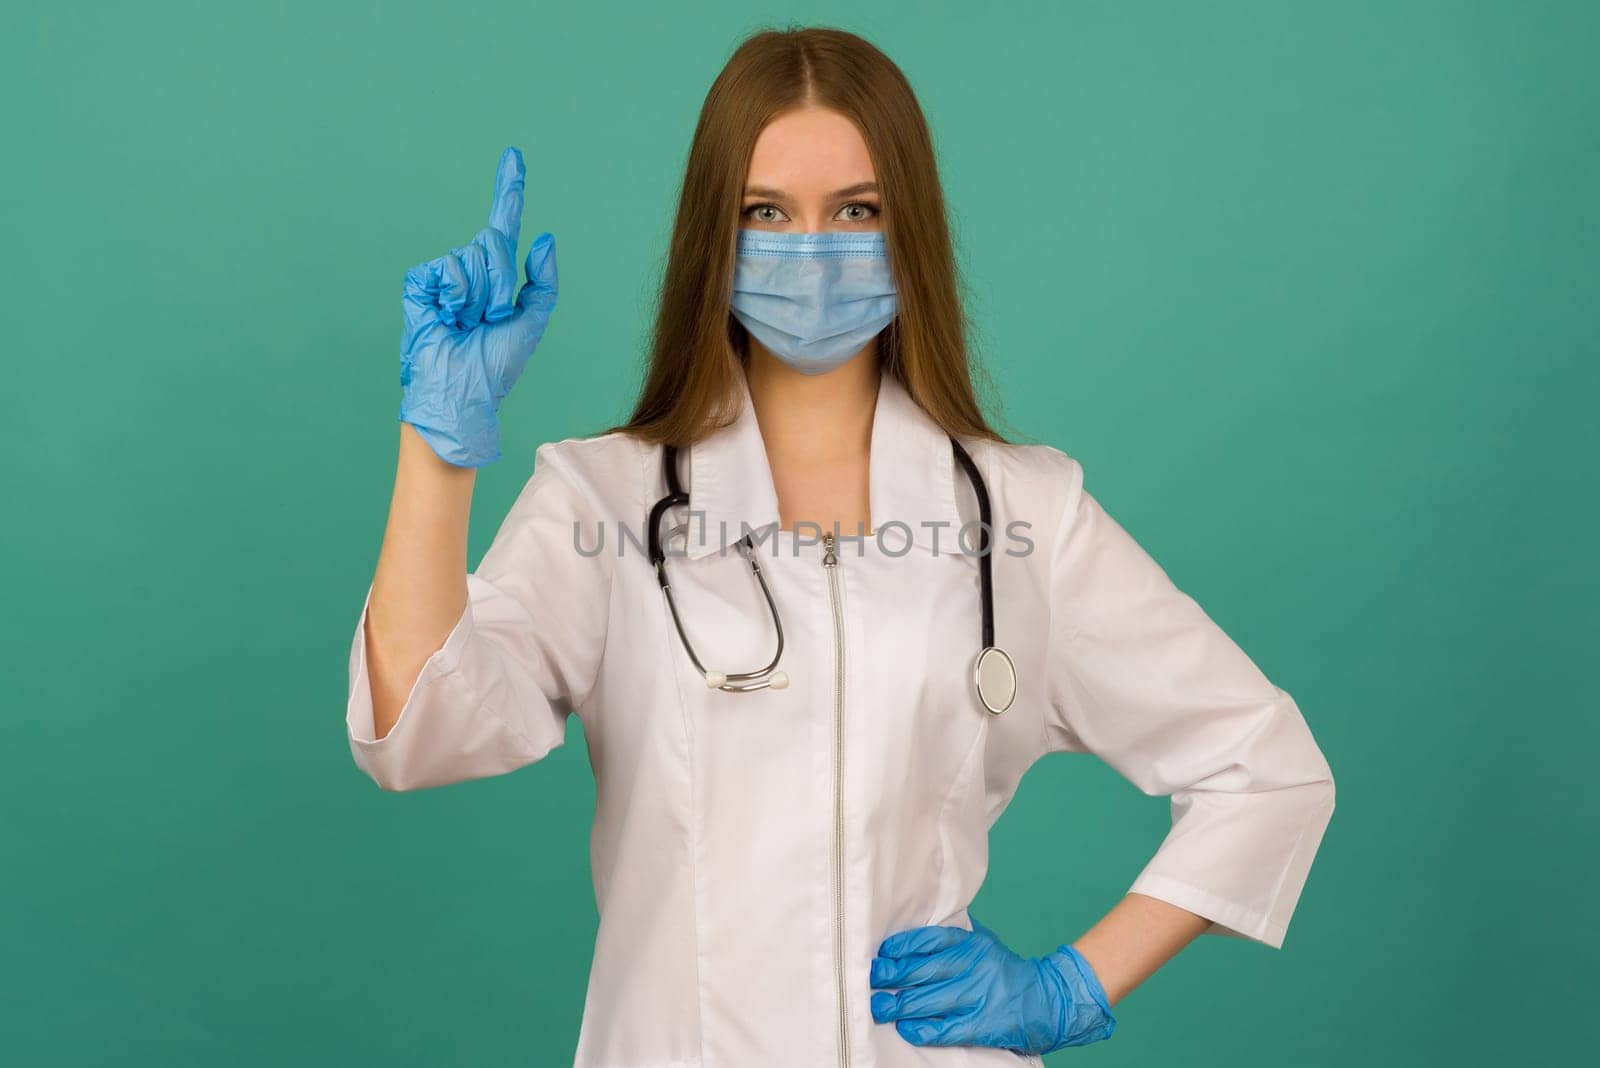 Covid19, coronavirus, healthcare and doctors concept. Portrait of professional confident young caucasian doctor in medical mask and white coat, stethoscope over neck, ready help patient, fight disease - image